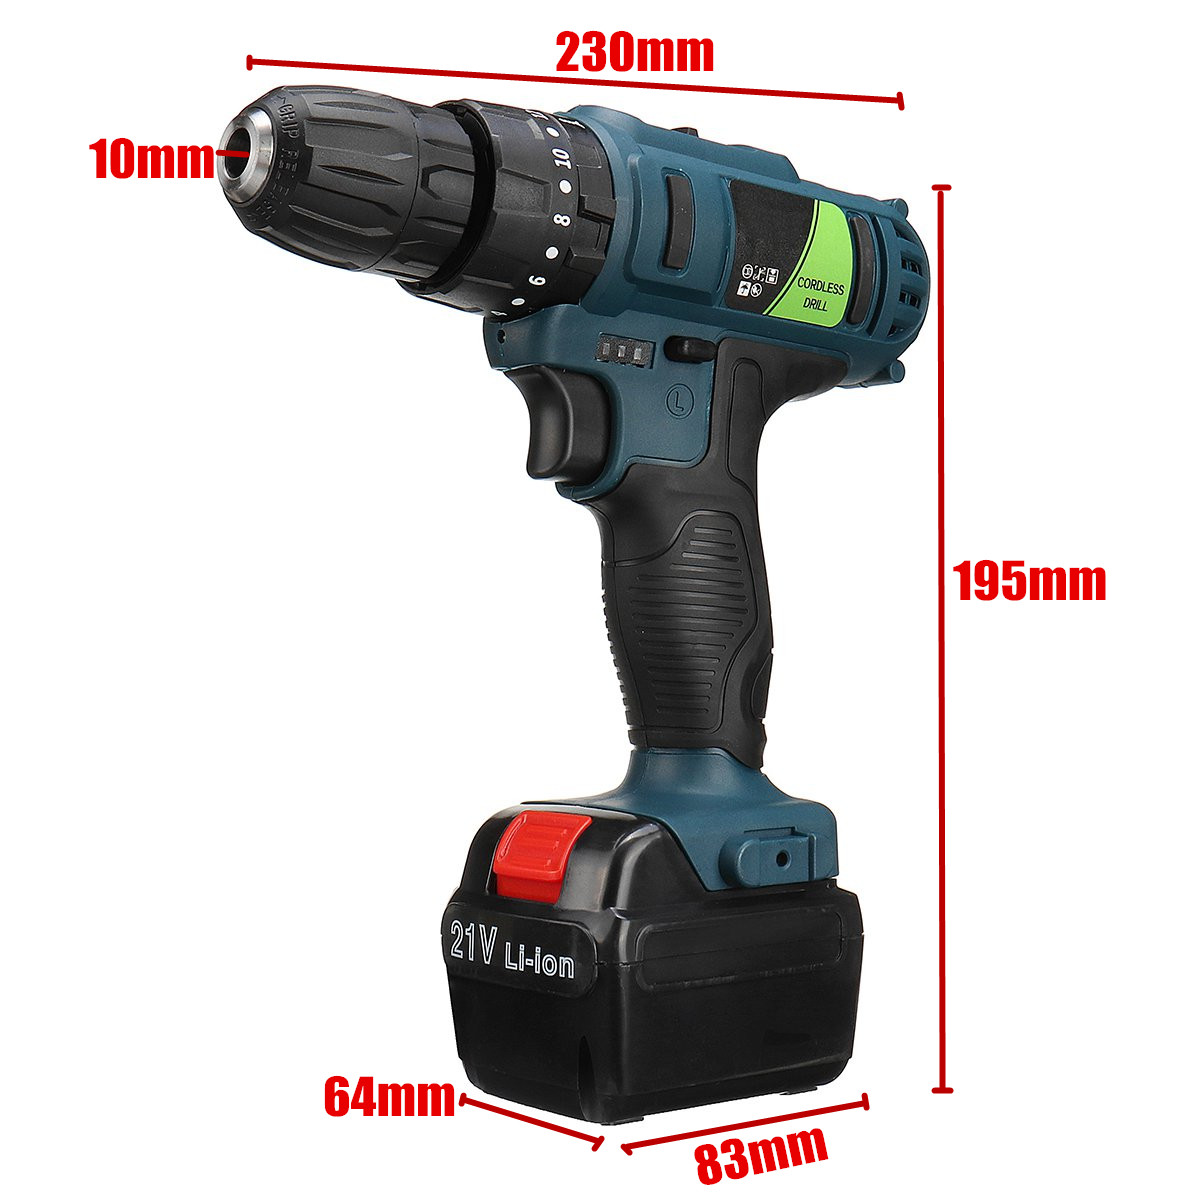 Adjustable-21V-Rechargeable-Cordless-Power-Impact-Drill-Electric-Screwdriver-with-2-Li-ion-Battery-1354629-9